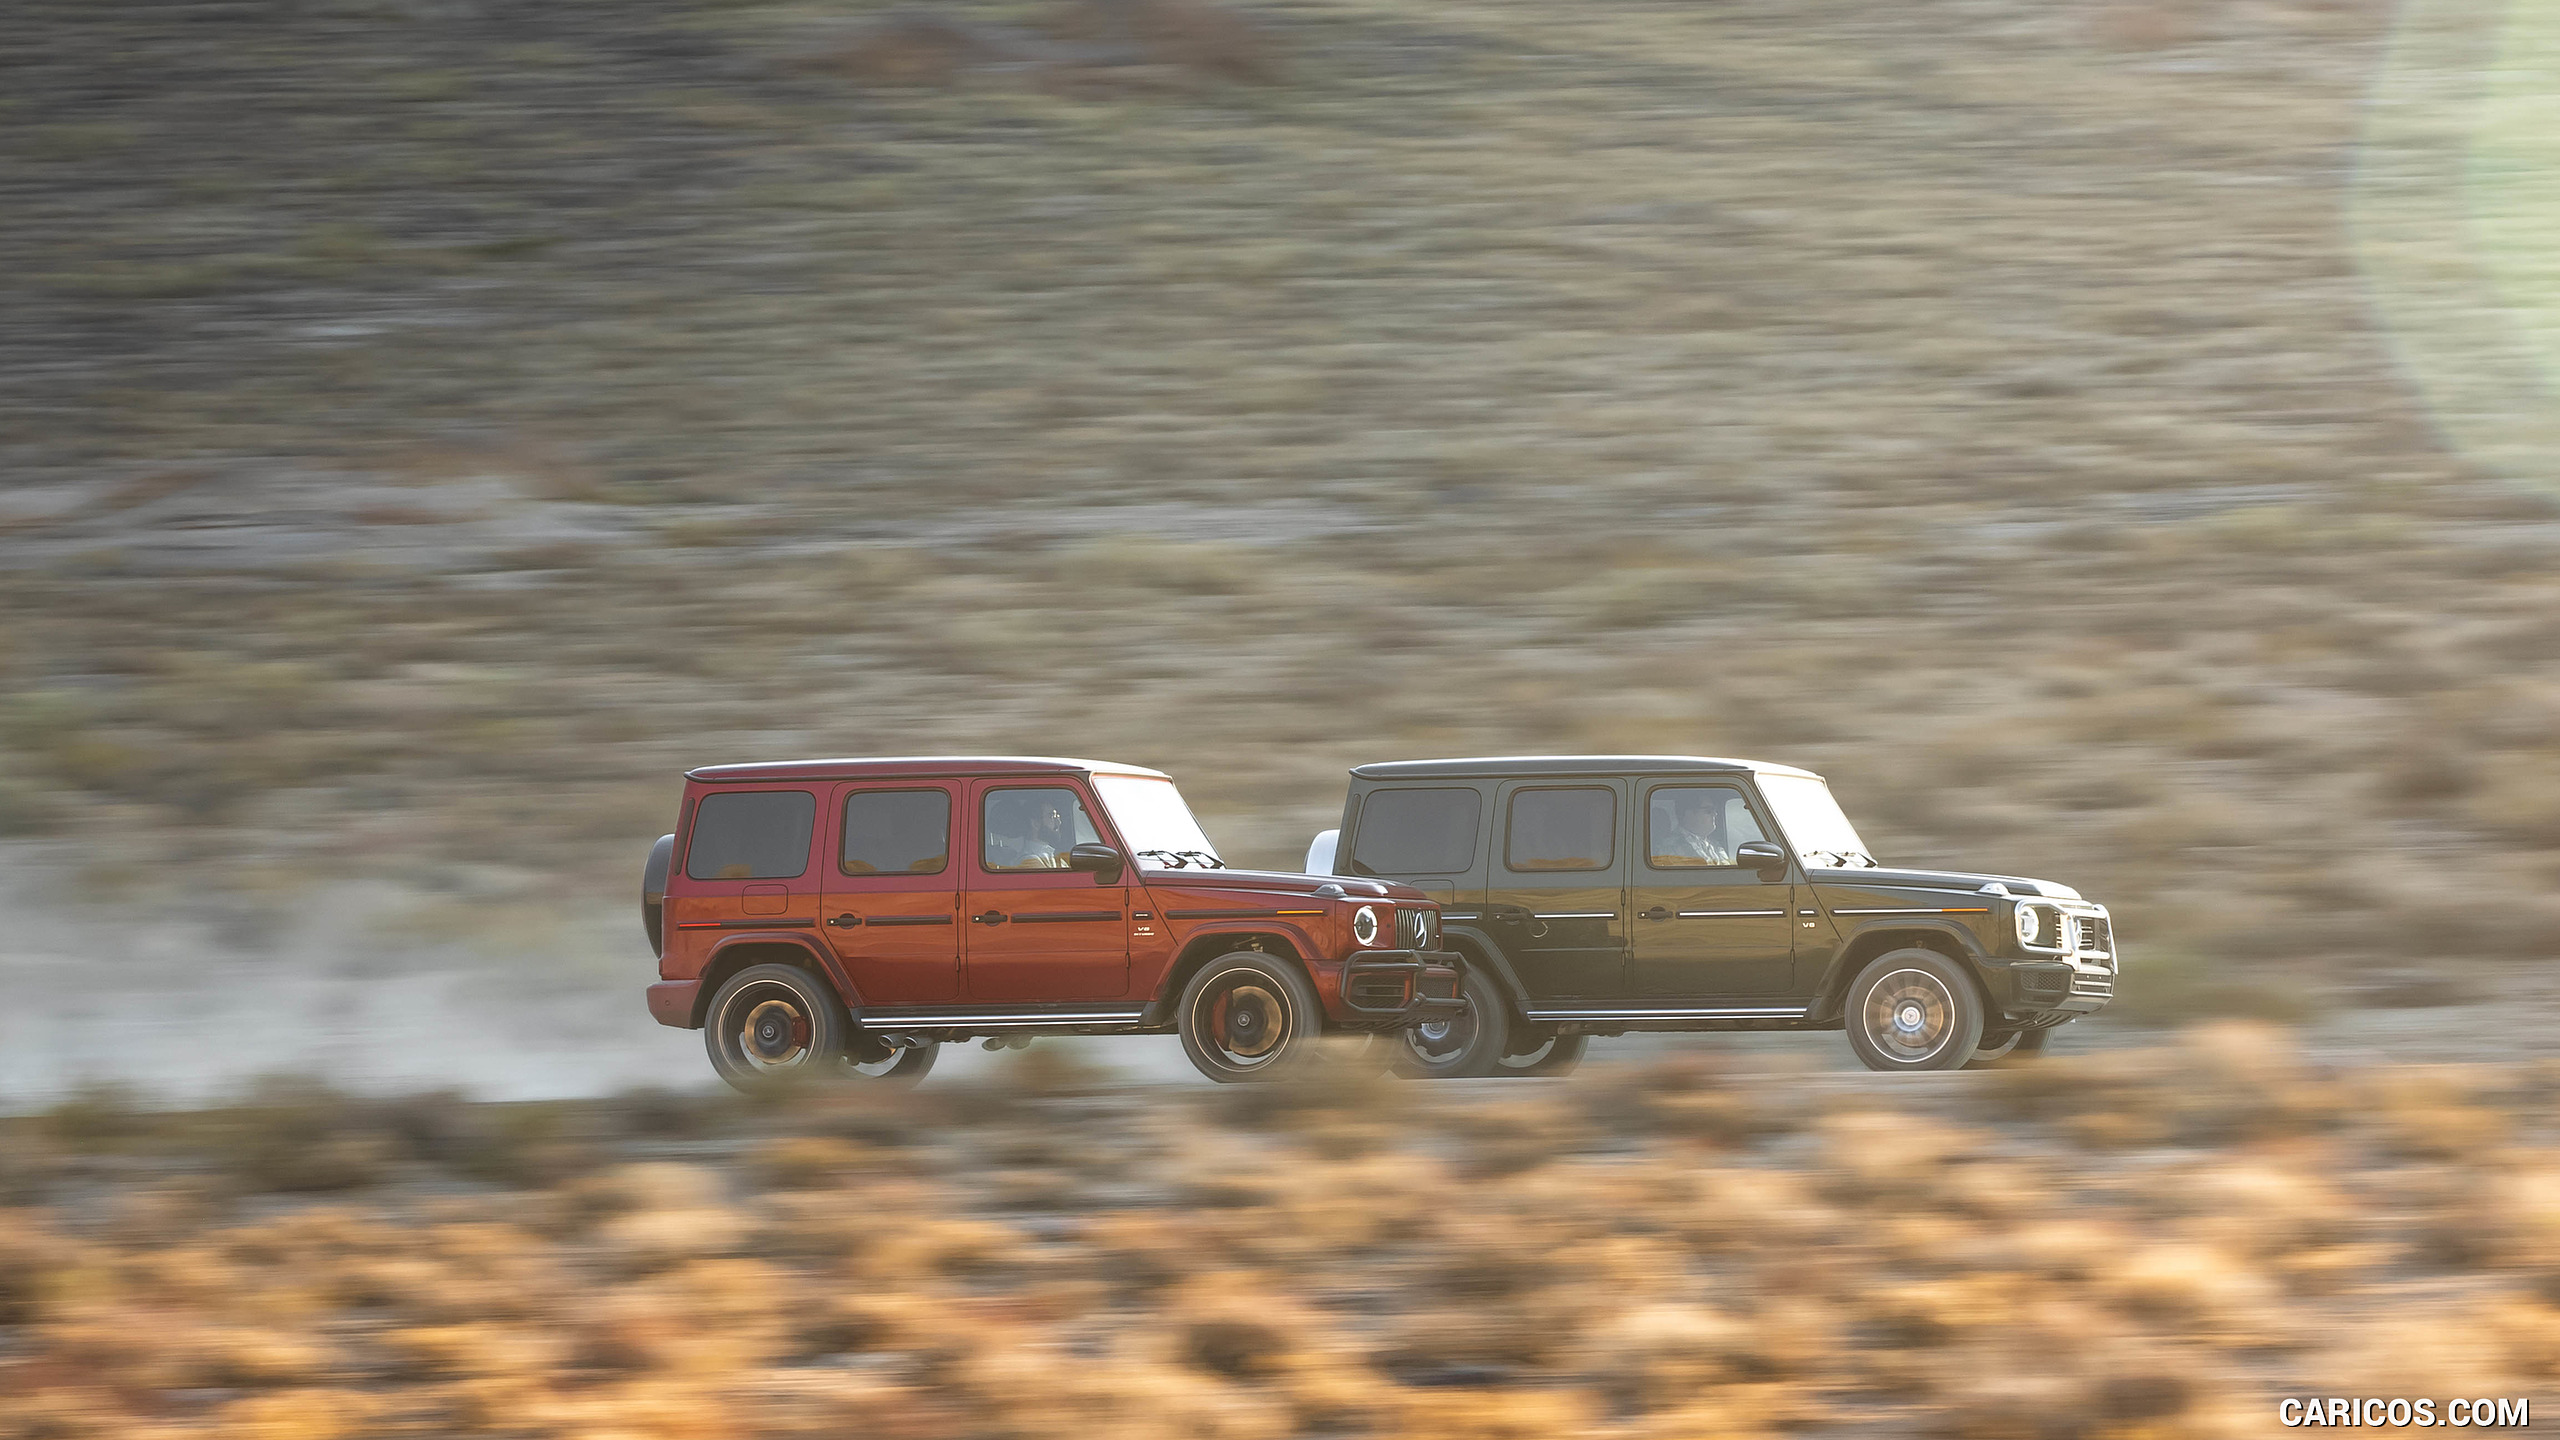 2019 Mercedes-Benz G550 G-Class (U.S.-Spec) and 2019 G63 AMG, #341 of 397